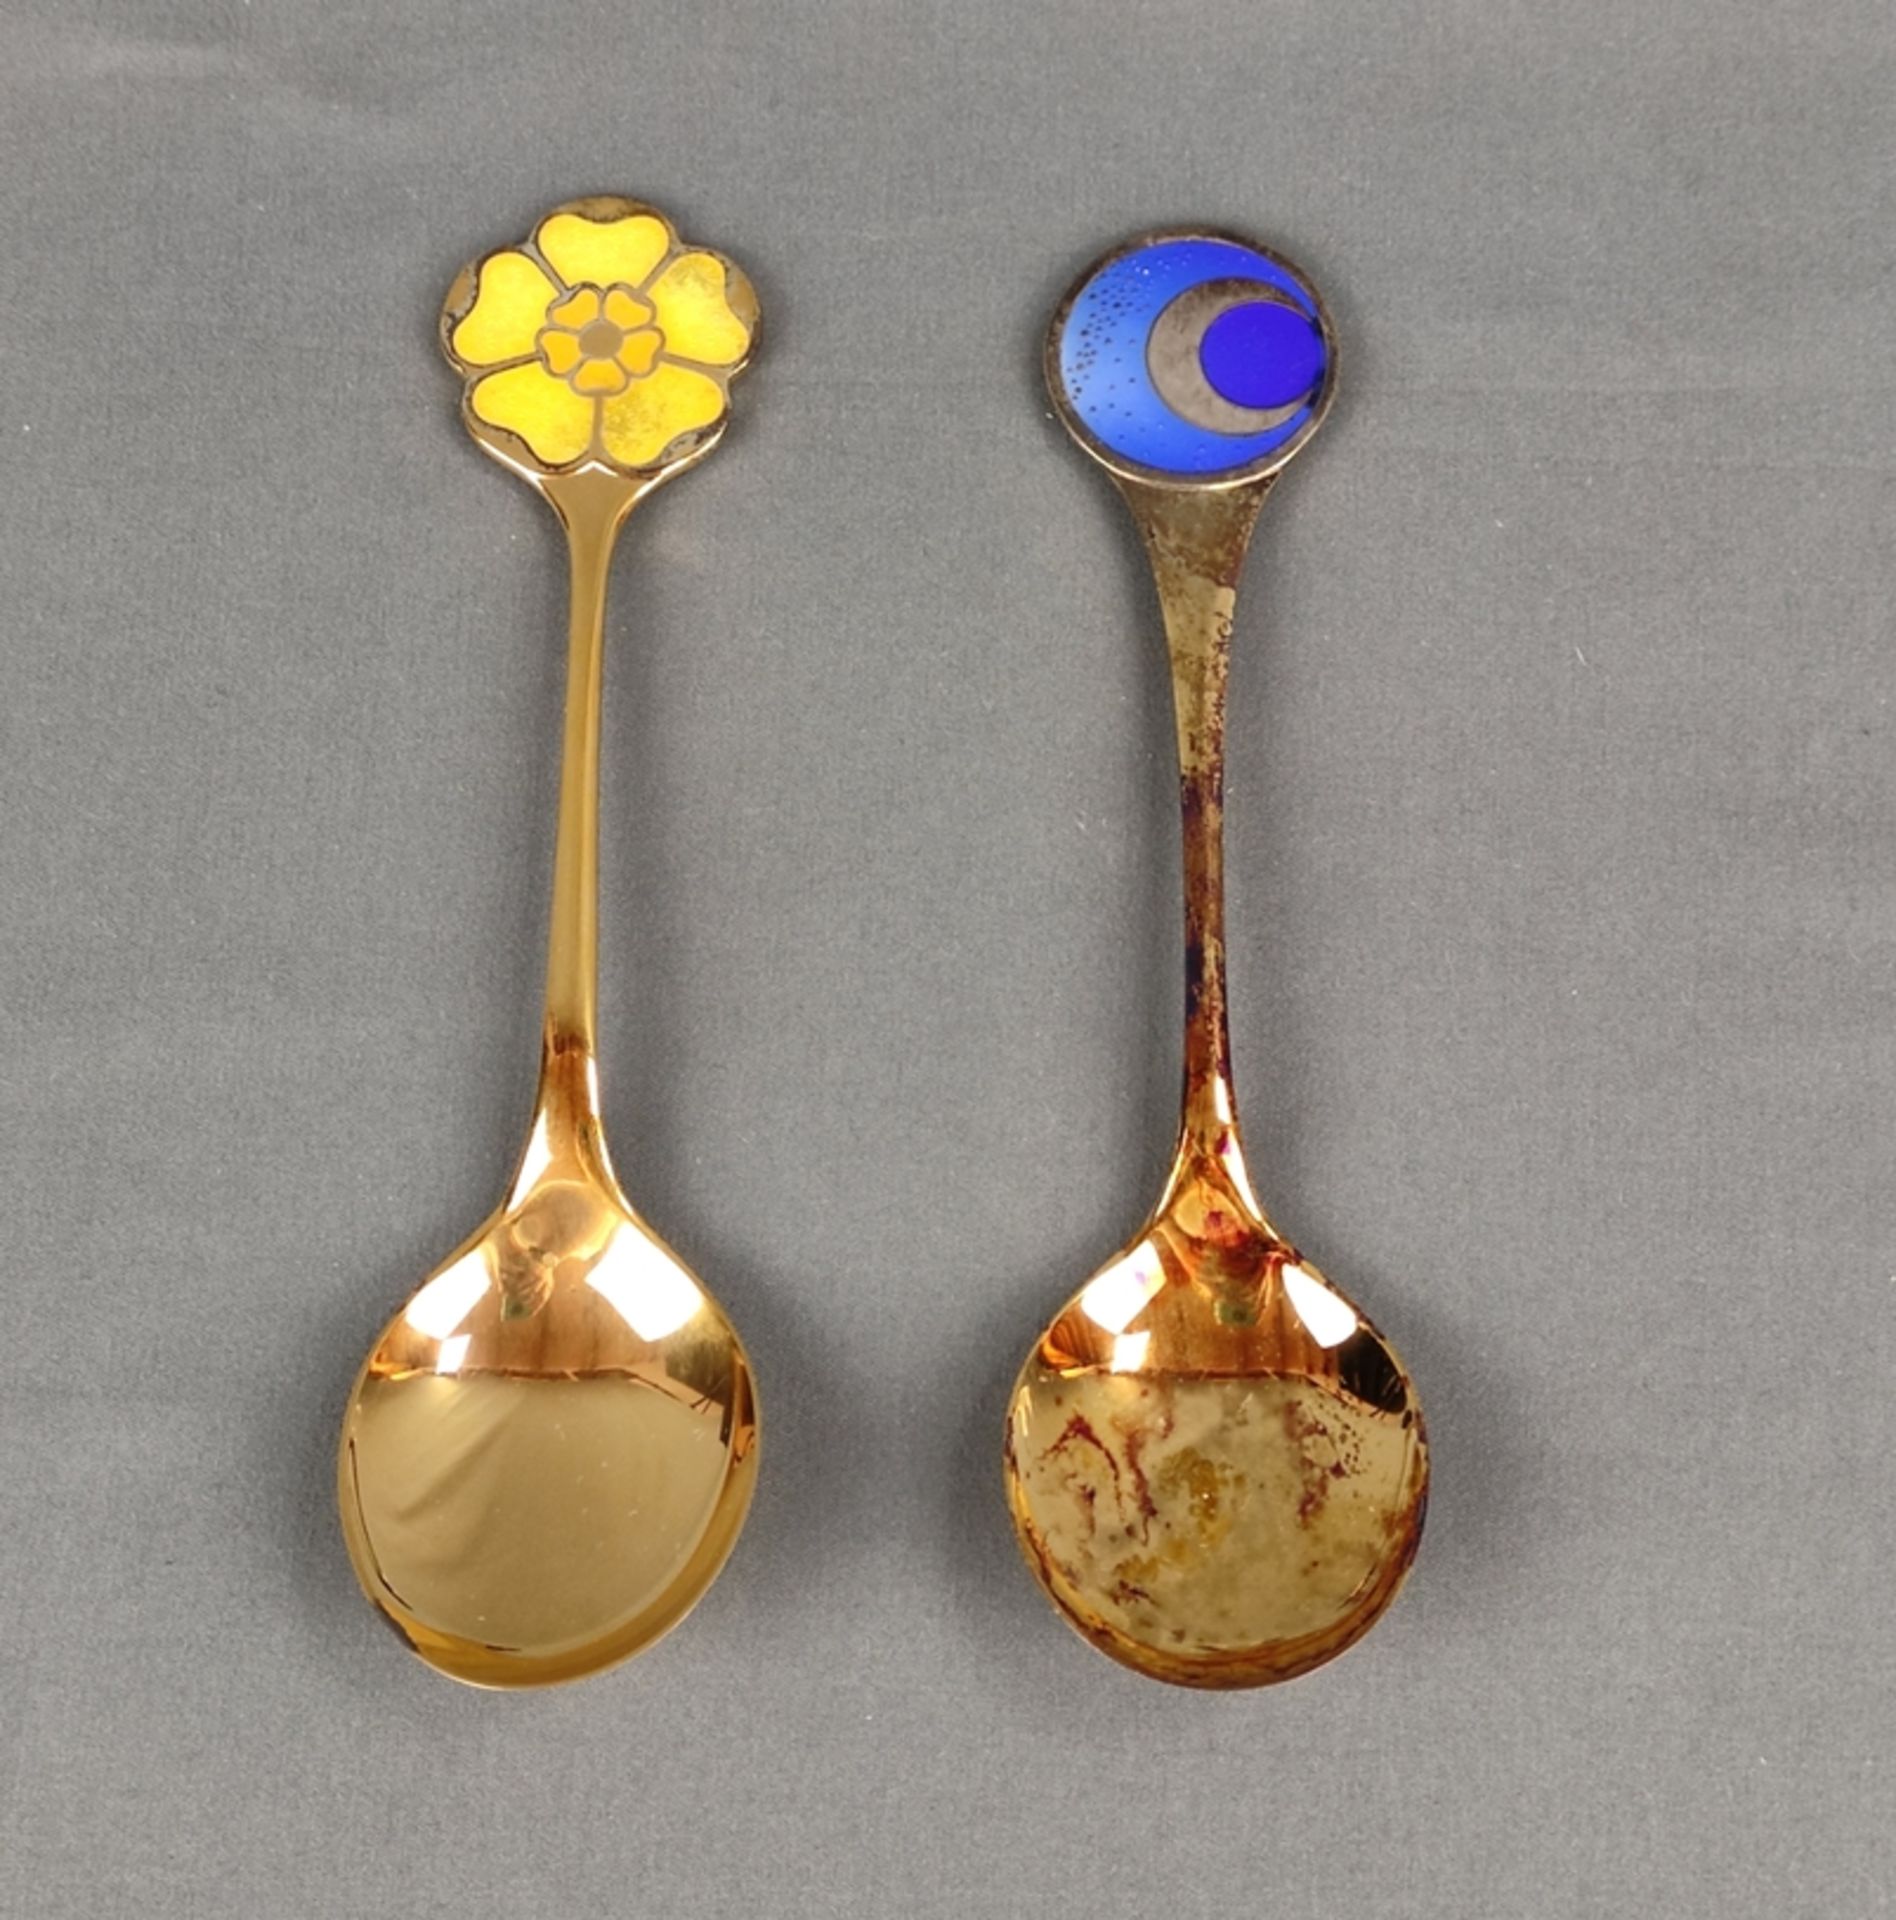 2 annual spoons, Robbe & Berking, sterling silver, relief worked and enamelled handle finishes, con